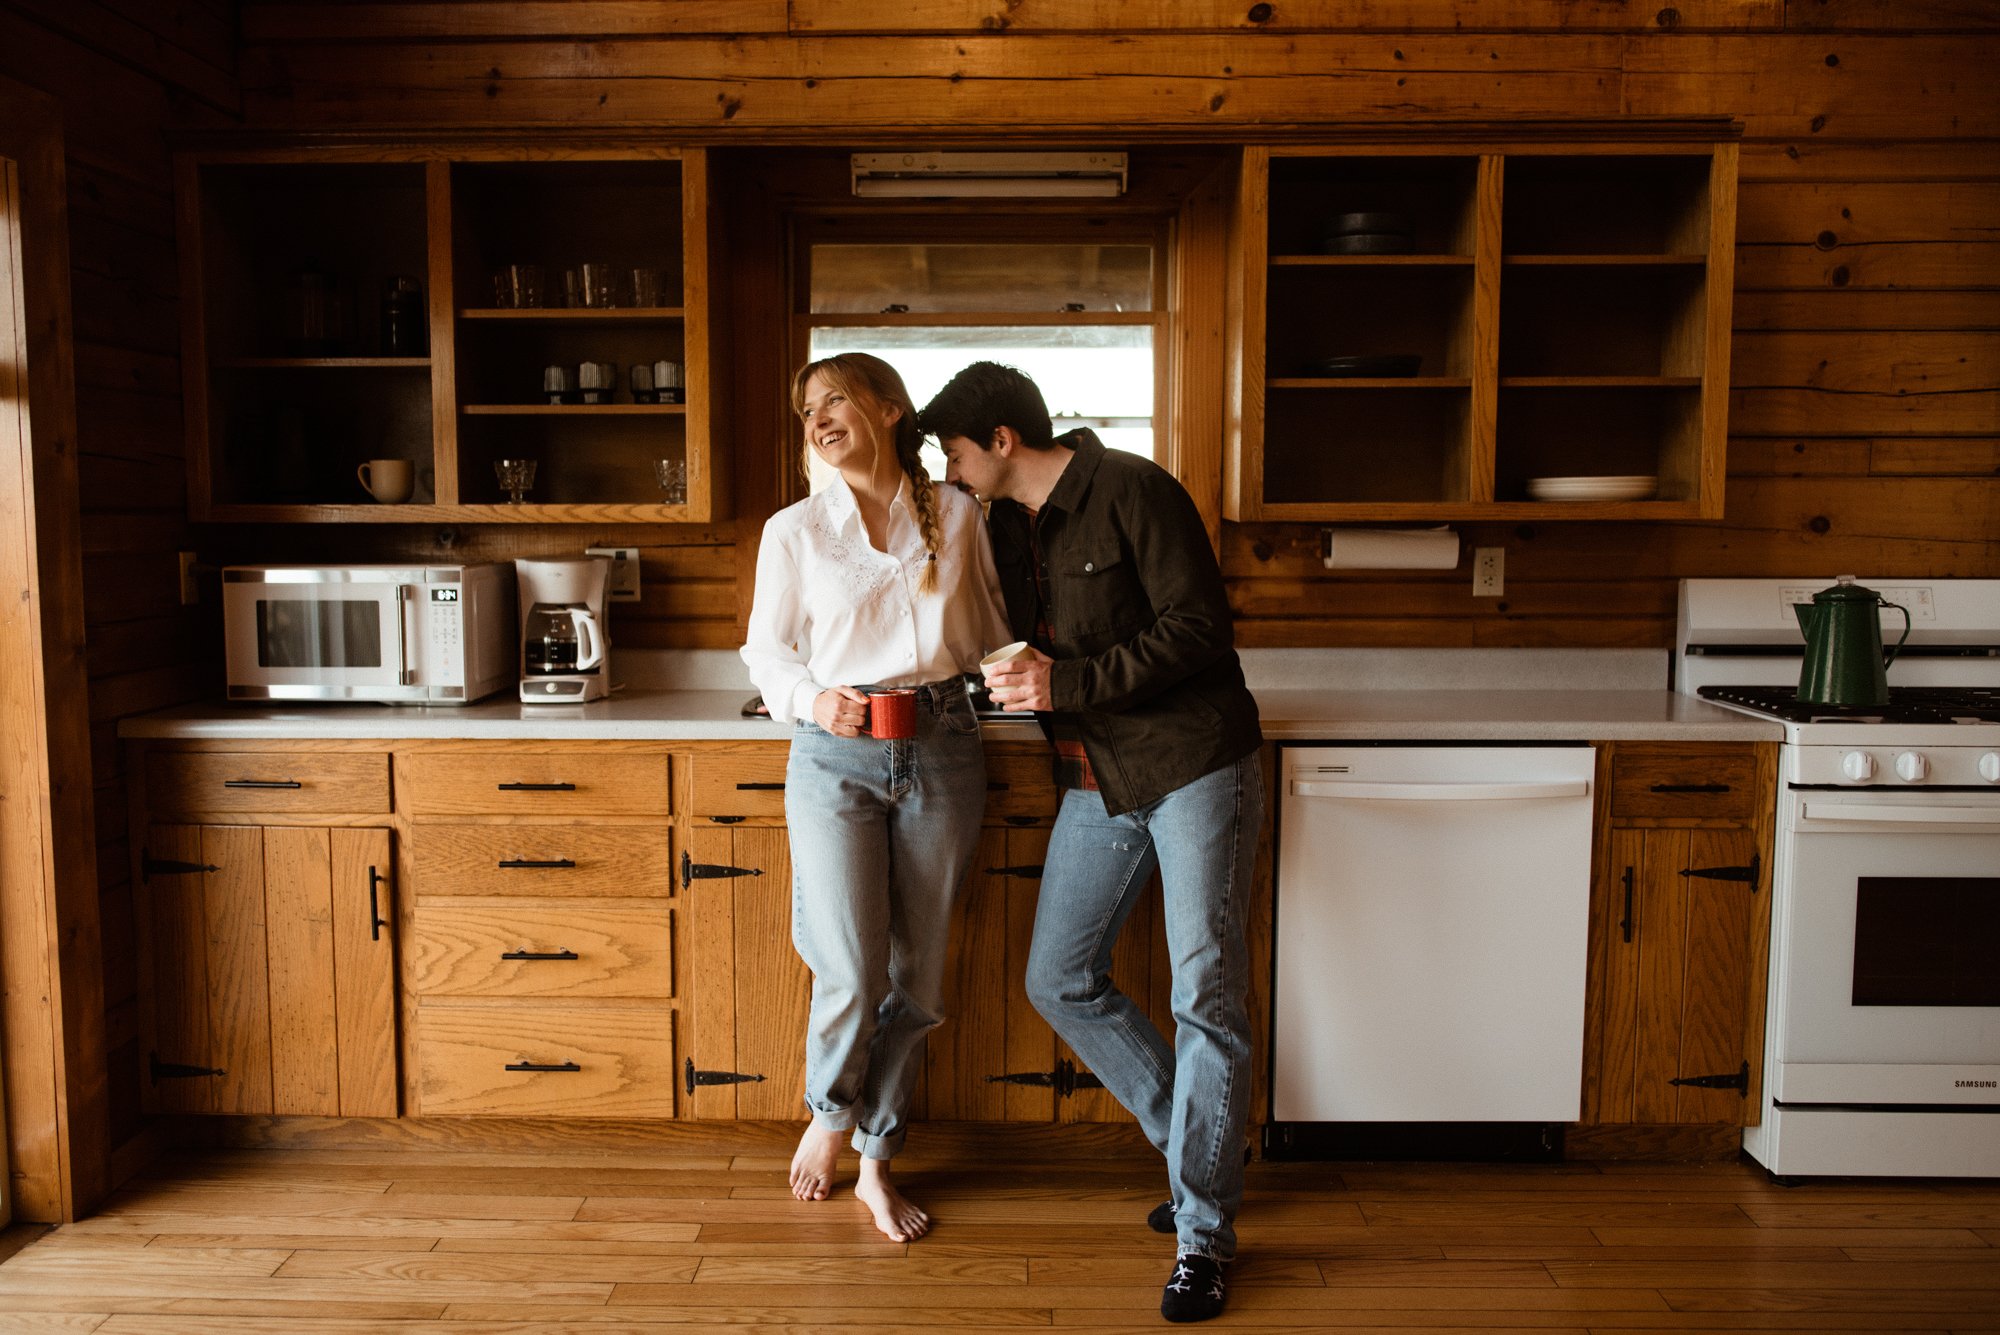 Sill and Glade Cabin Elopement in Virginia - Mountain Airbnb Elopement - White Sails Creative - Blue Ridge Mountains Elopement Cabin Inspiration_37.jpg